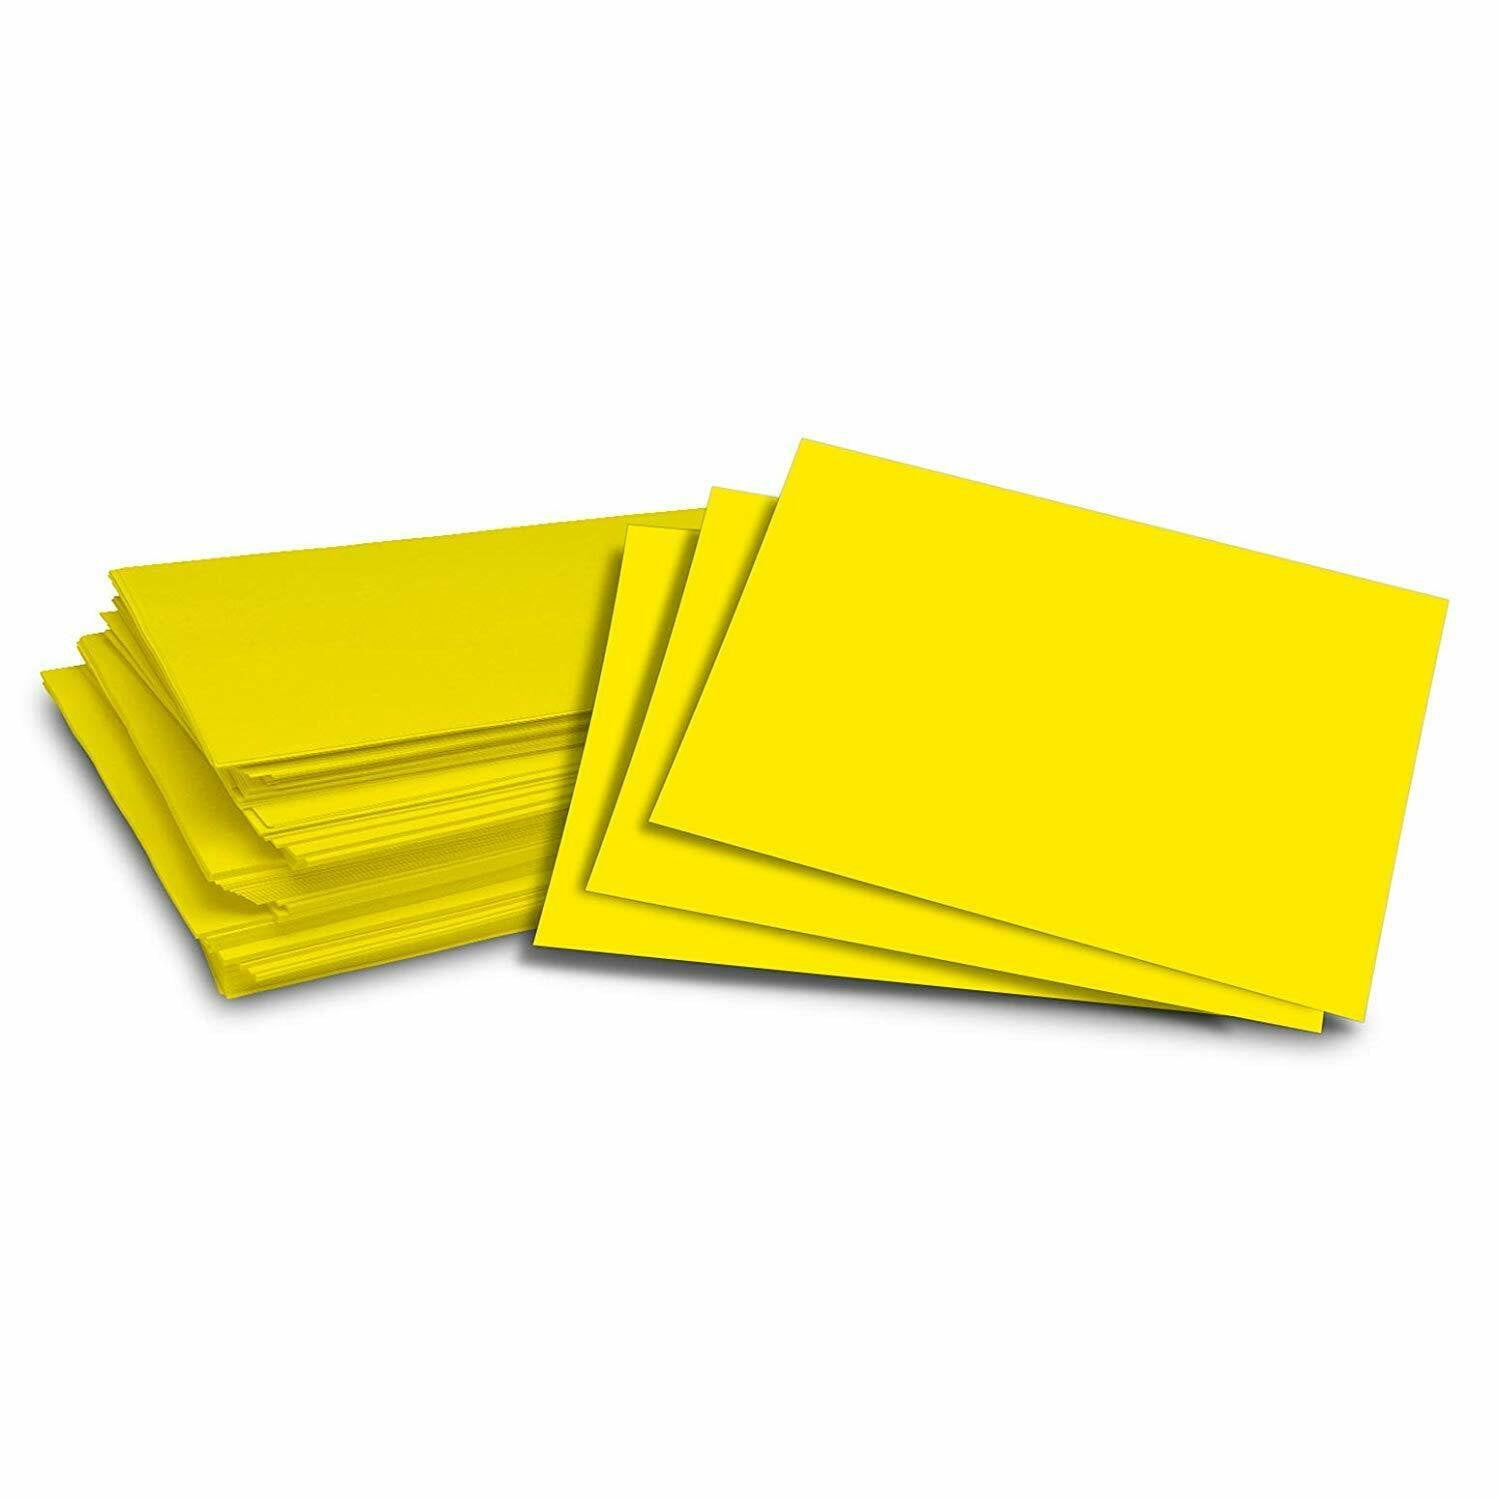 Quality Printable Smooth Surface Sheets Statement Size 5.5X8.5 Inches Half Letter 100 Bright Neon Yellow Fluorescent Color Cardstock 5.5 X 8.5 65# lb/pound Light Card Weight Cover Paper 